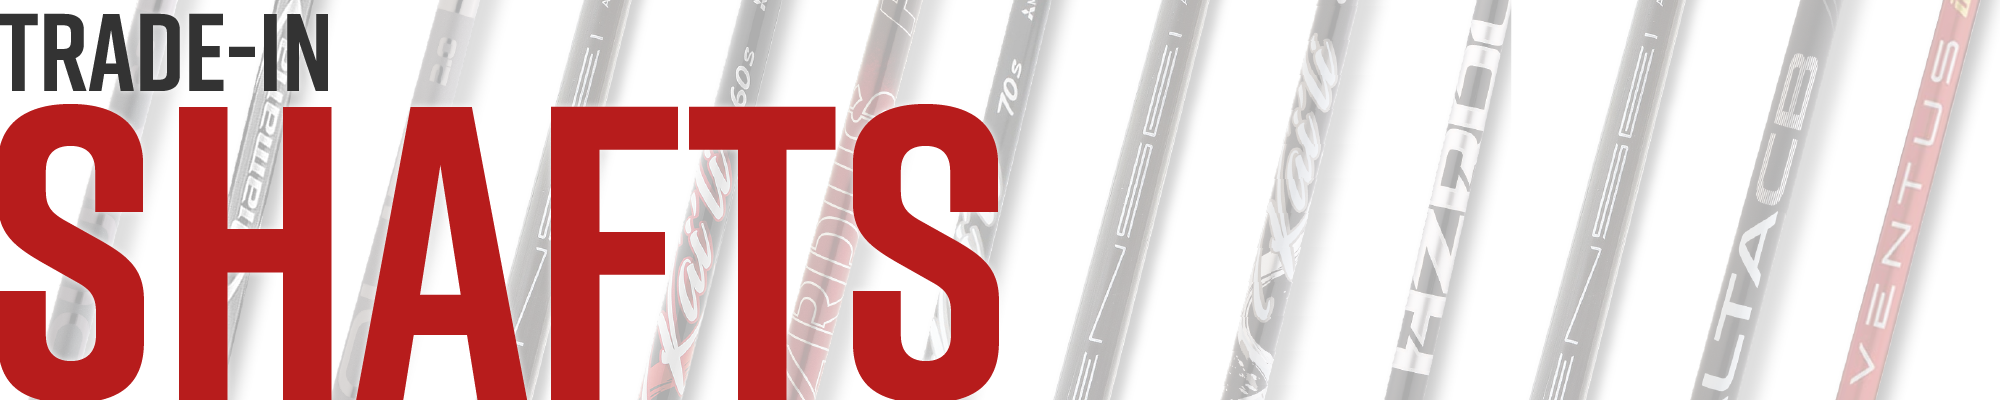 Trade-In Shafts